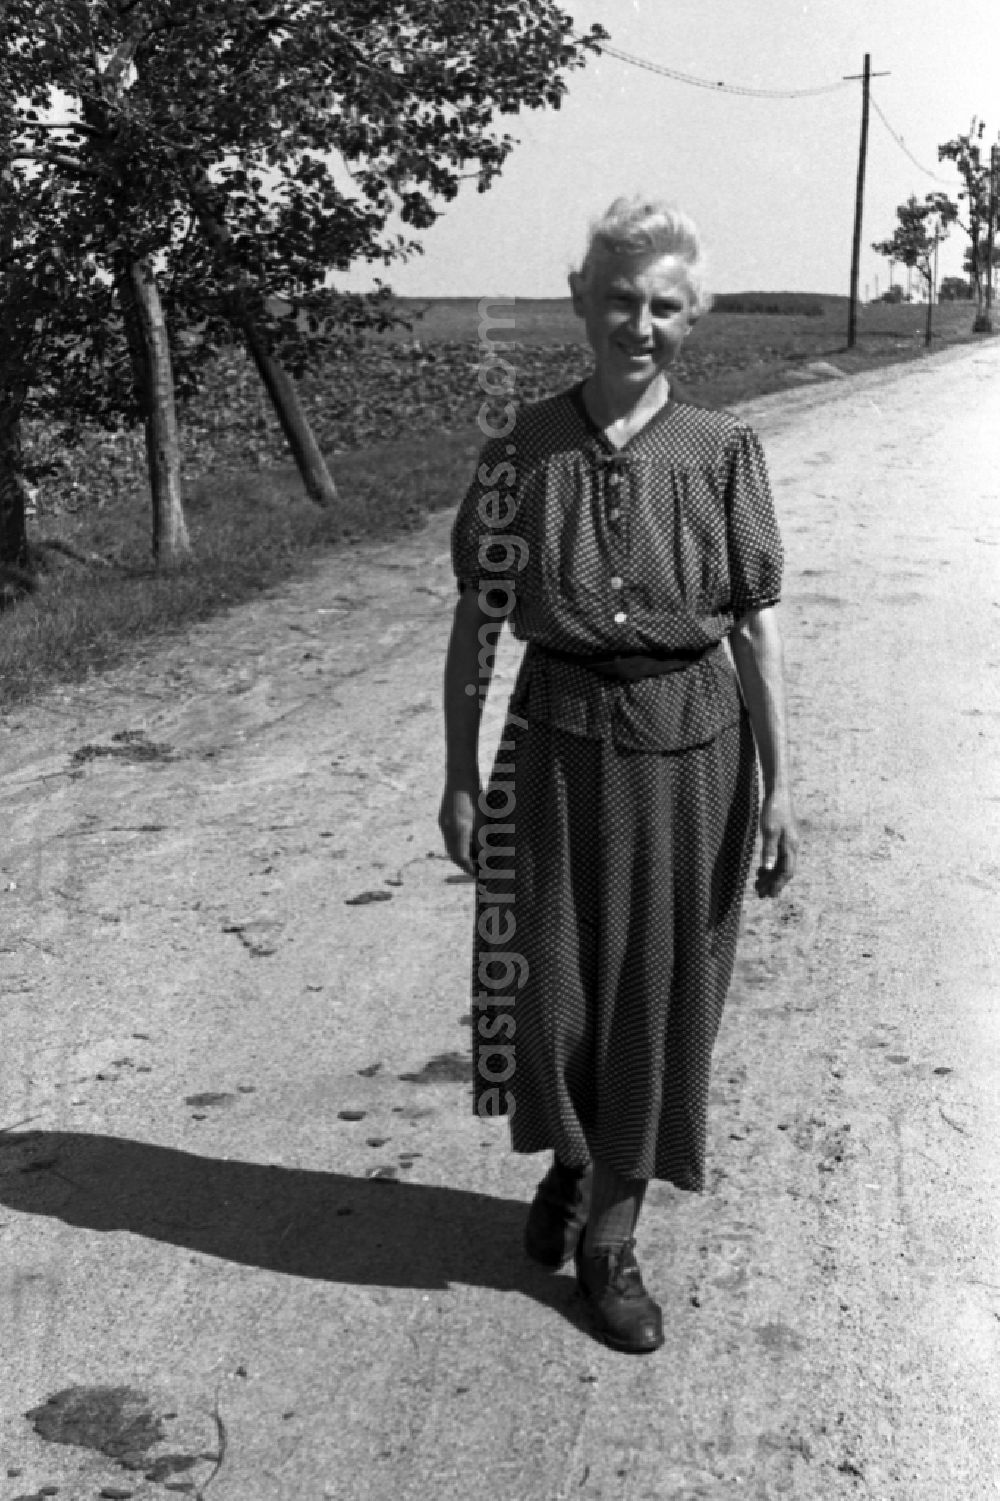 GDR image archive: Trossin - Farmer on a country lane in Trossin in the federal state Saxony in Germany